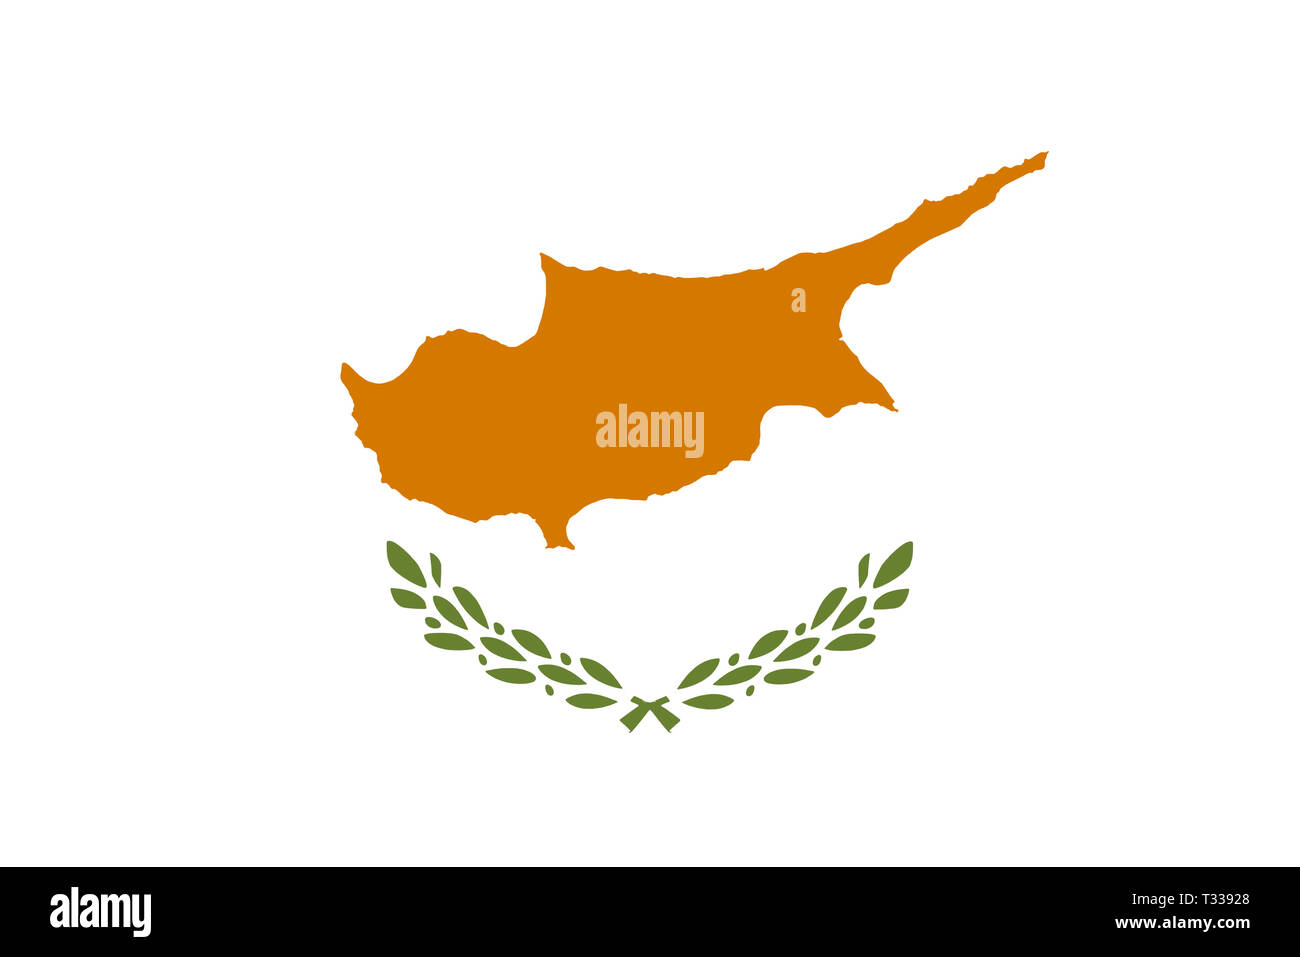 Cypriot flag a Greek and Turkish island in Europe Stock Photo